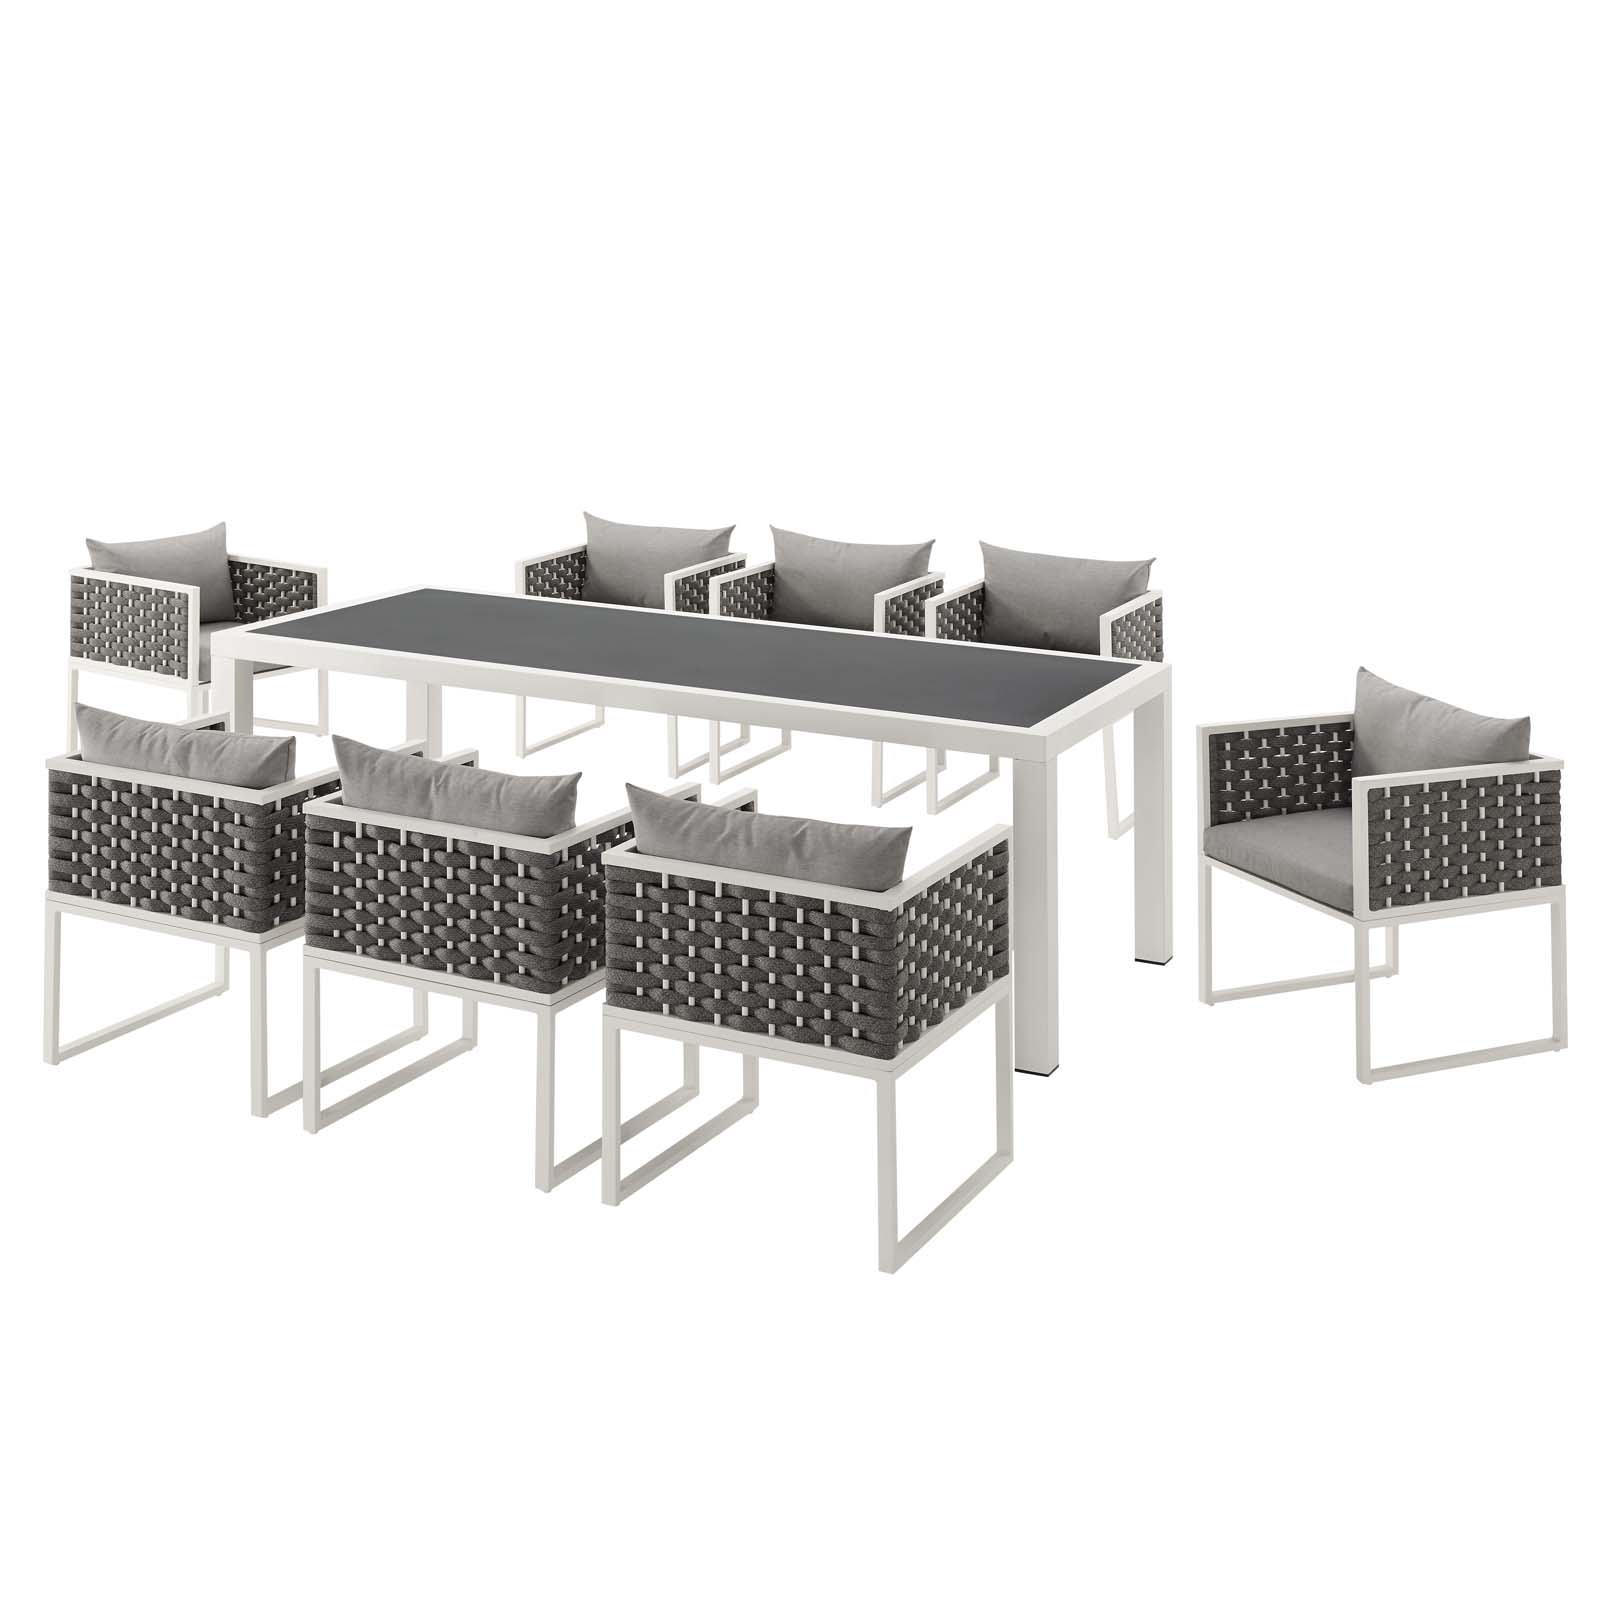 Contemporary Modern Urban Designer Outdoor Patio Balcony Garden Furniture Side Dining Chair and Table Set, Aluminum Fabric, White Grey Gray - image 3 of 8